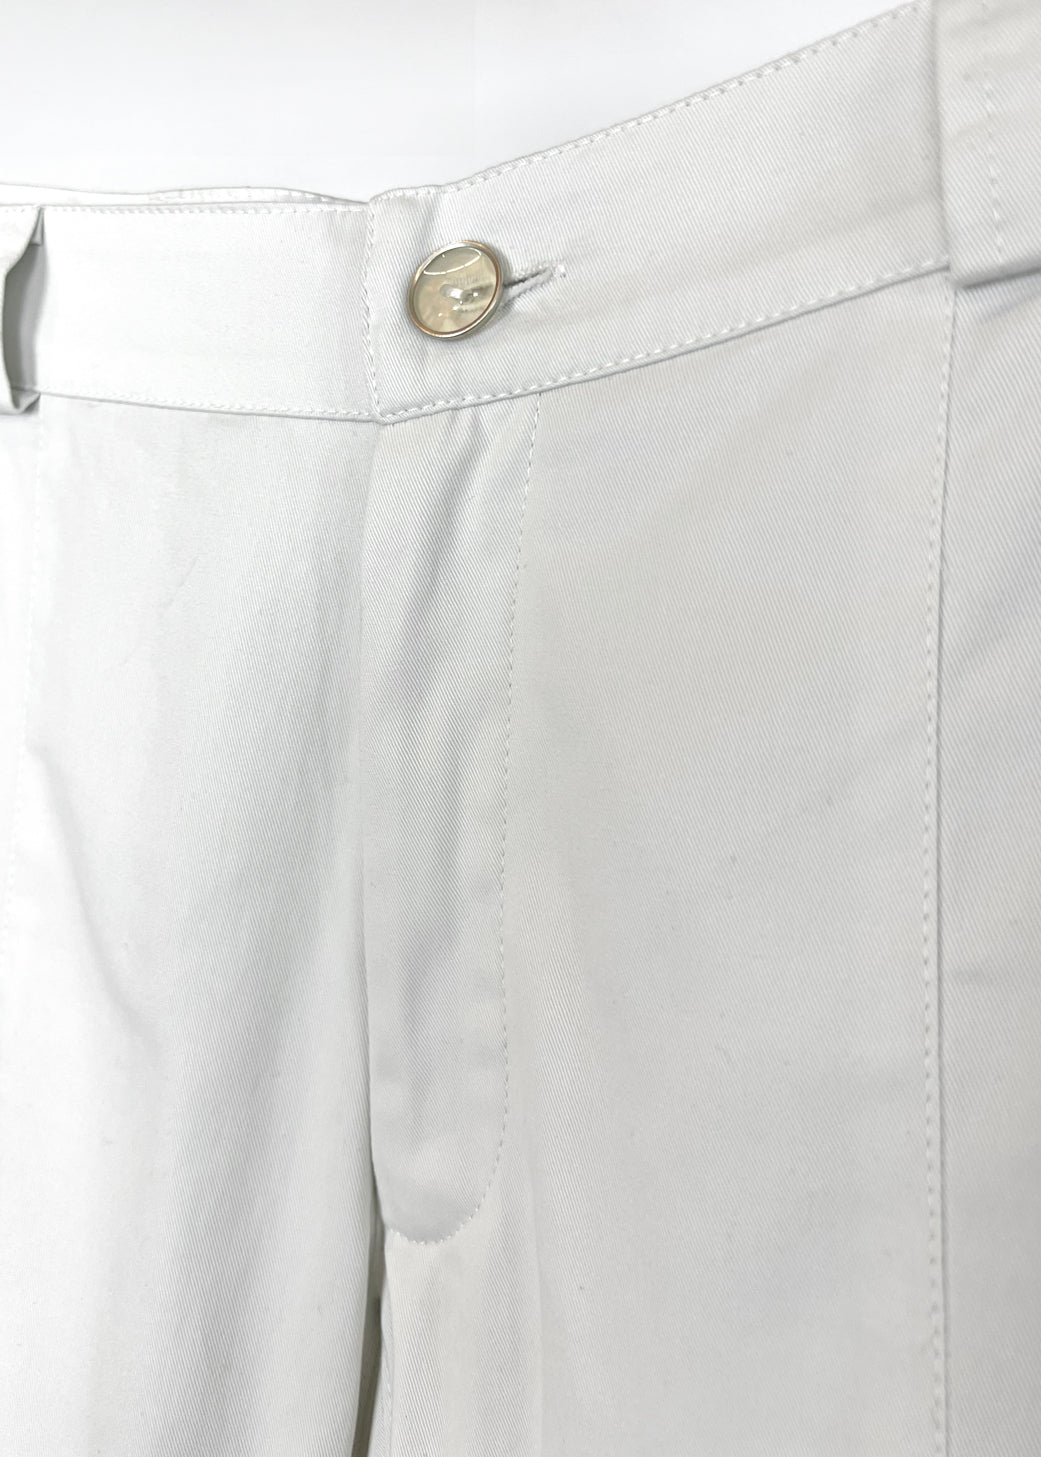 Cargo Pants with Pockets and Panels in Cream Cotton "Billie"